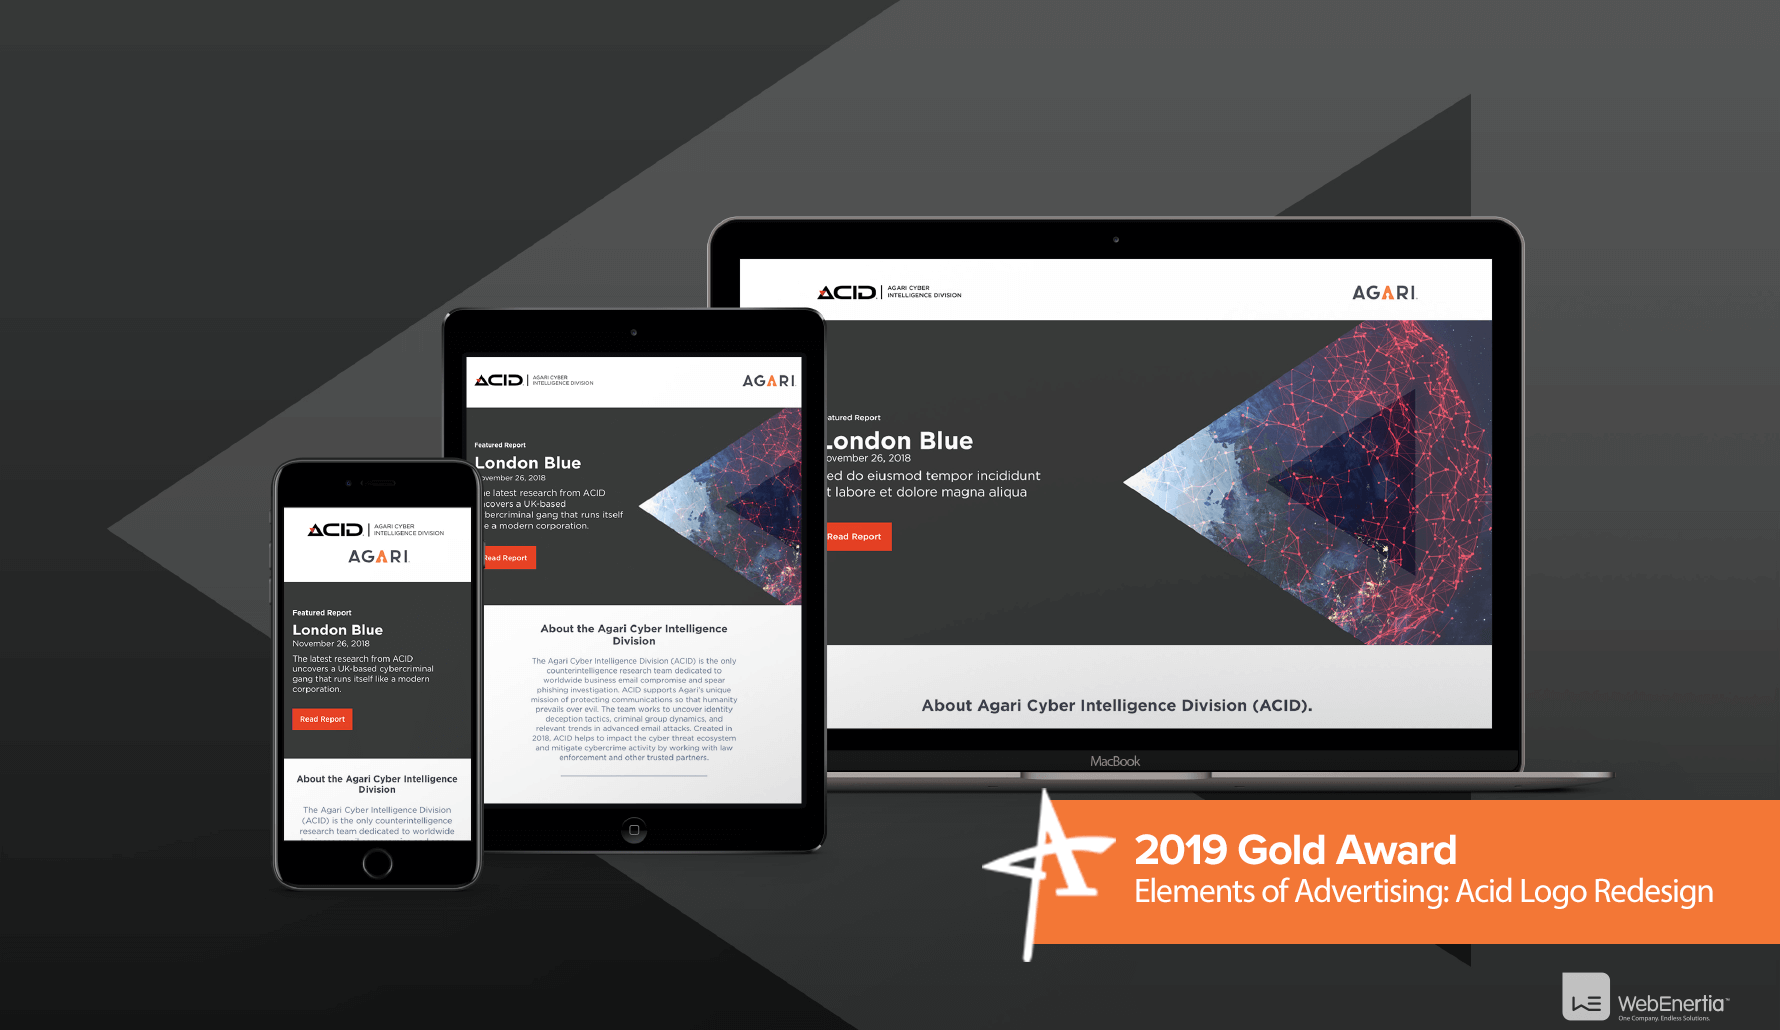 2019 Gold Addy Award - Elements of Advertising: Acid Logo Redesign